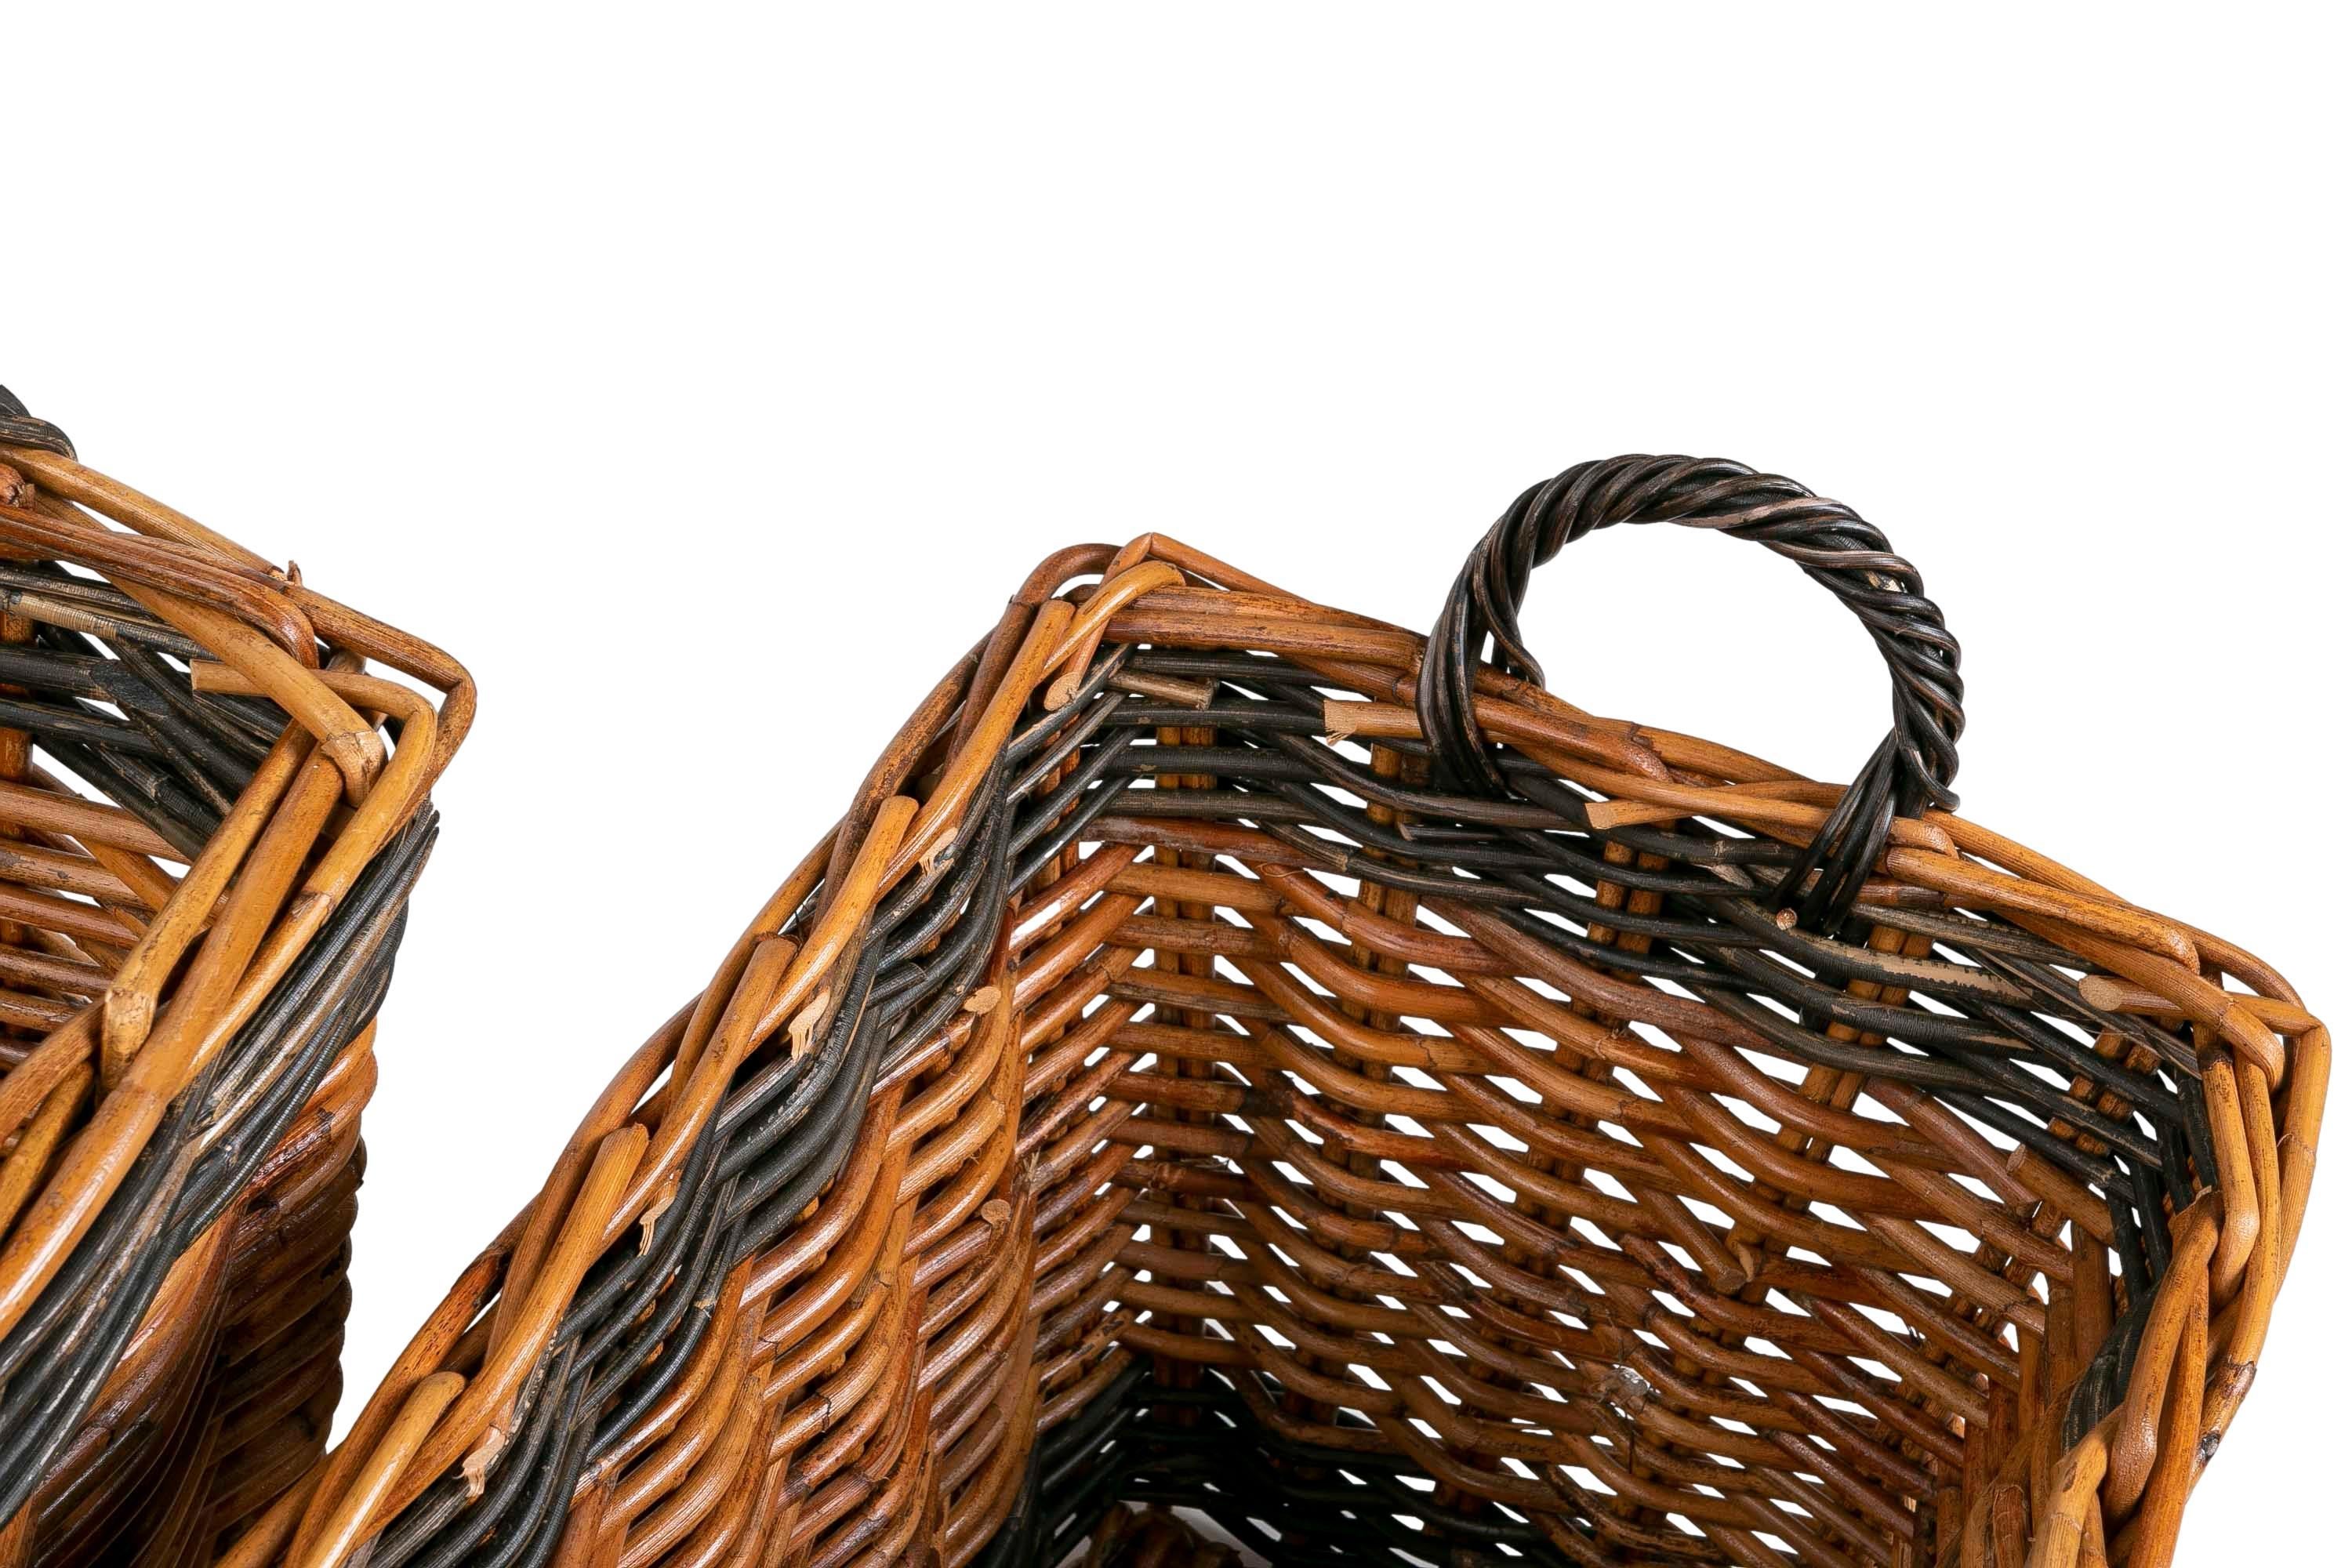 Set Consisting of Three Decorative Wicker Baskets of Different Sizes For Sale 7